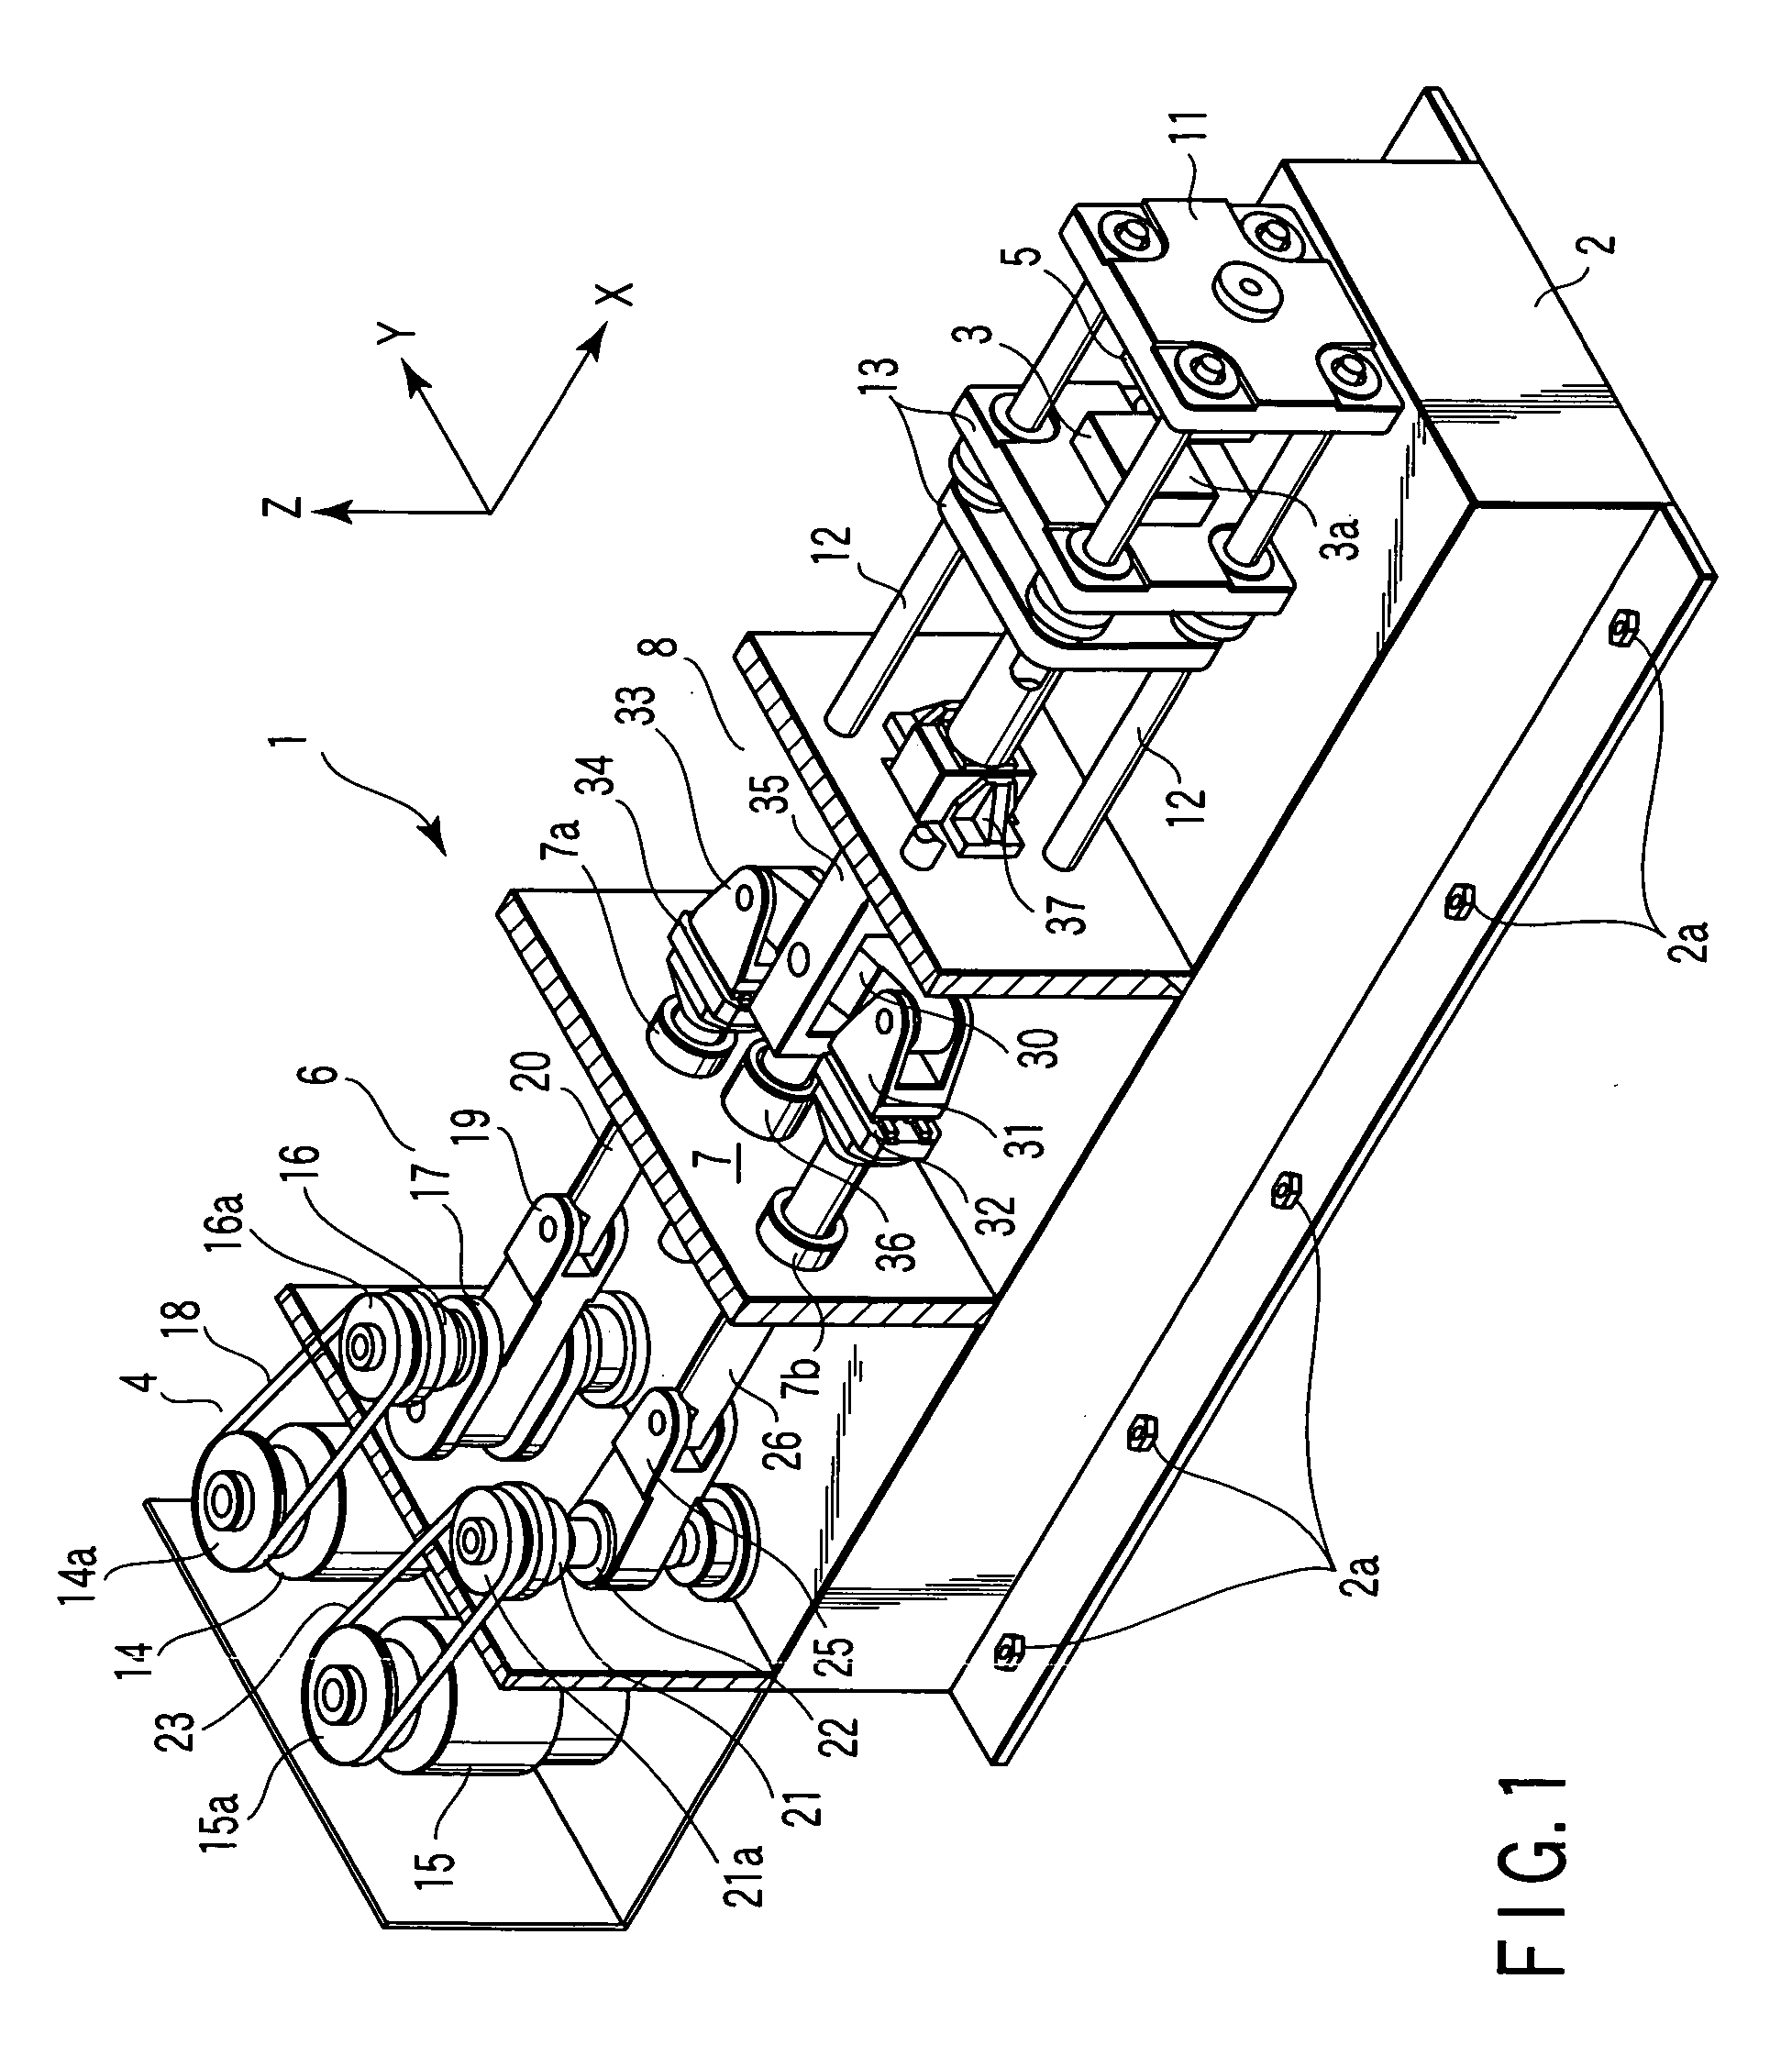 Press mechanism, clamp mechanism, and molding machine using this clamp mechanism